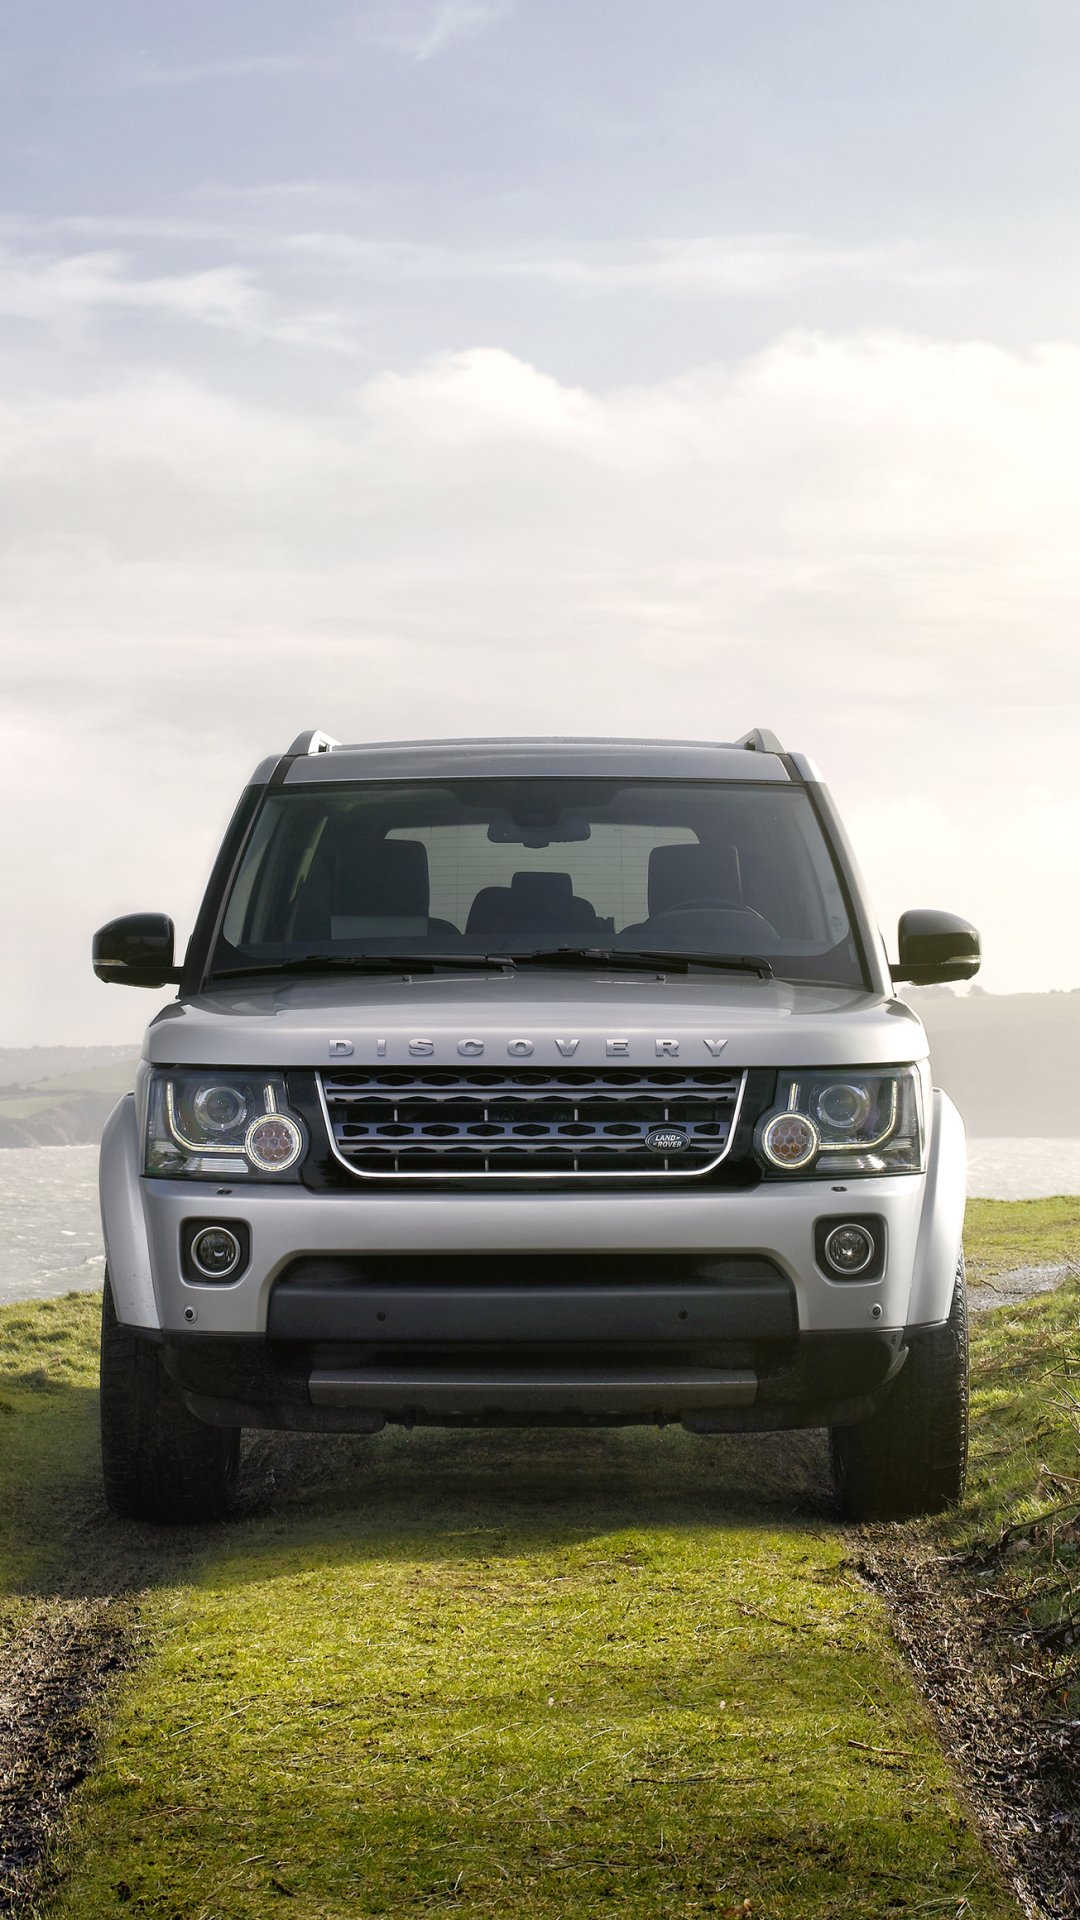 Land Rover Discovery Wallpapers - Wallpaper Cave